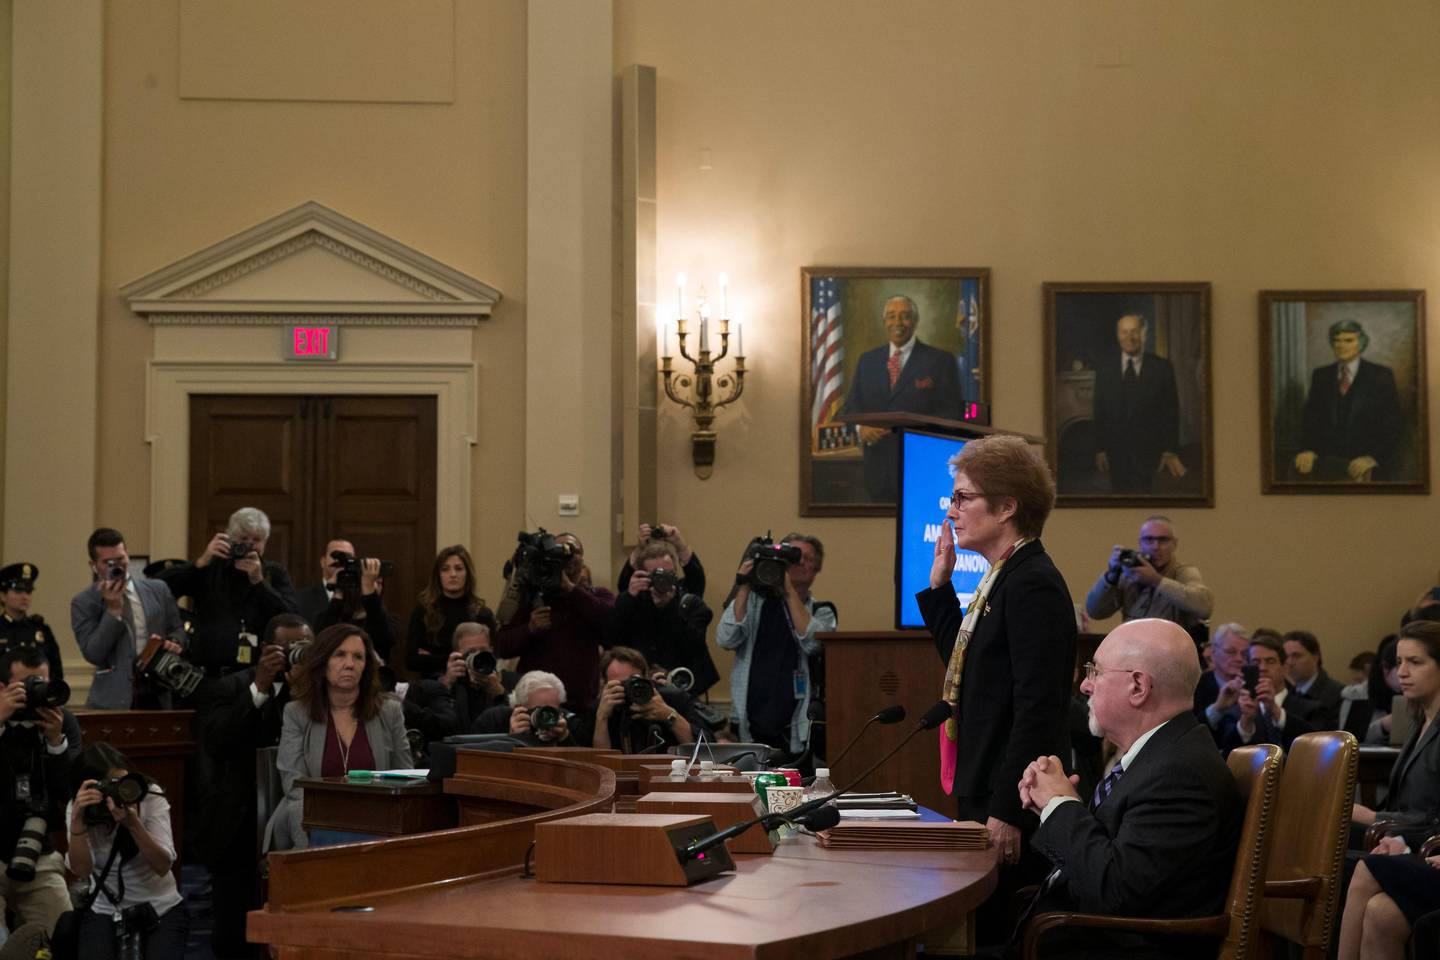 Former U.S. Ambassador to Ukraine Marie Yovanovitch is sworn in to testify before the House Intelligence Committee on Capitol Hill in Washington, Friday, Nov. 15, 2019, during the second public impeachment hearing of President Donald Trump's efforts to tie U.S. aid for Ukraine to investigations of his political opponents. (AP Photo/Alex Brandon)